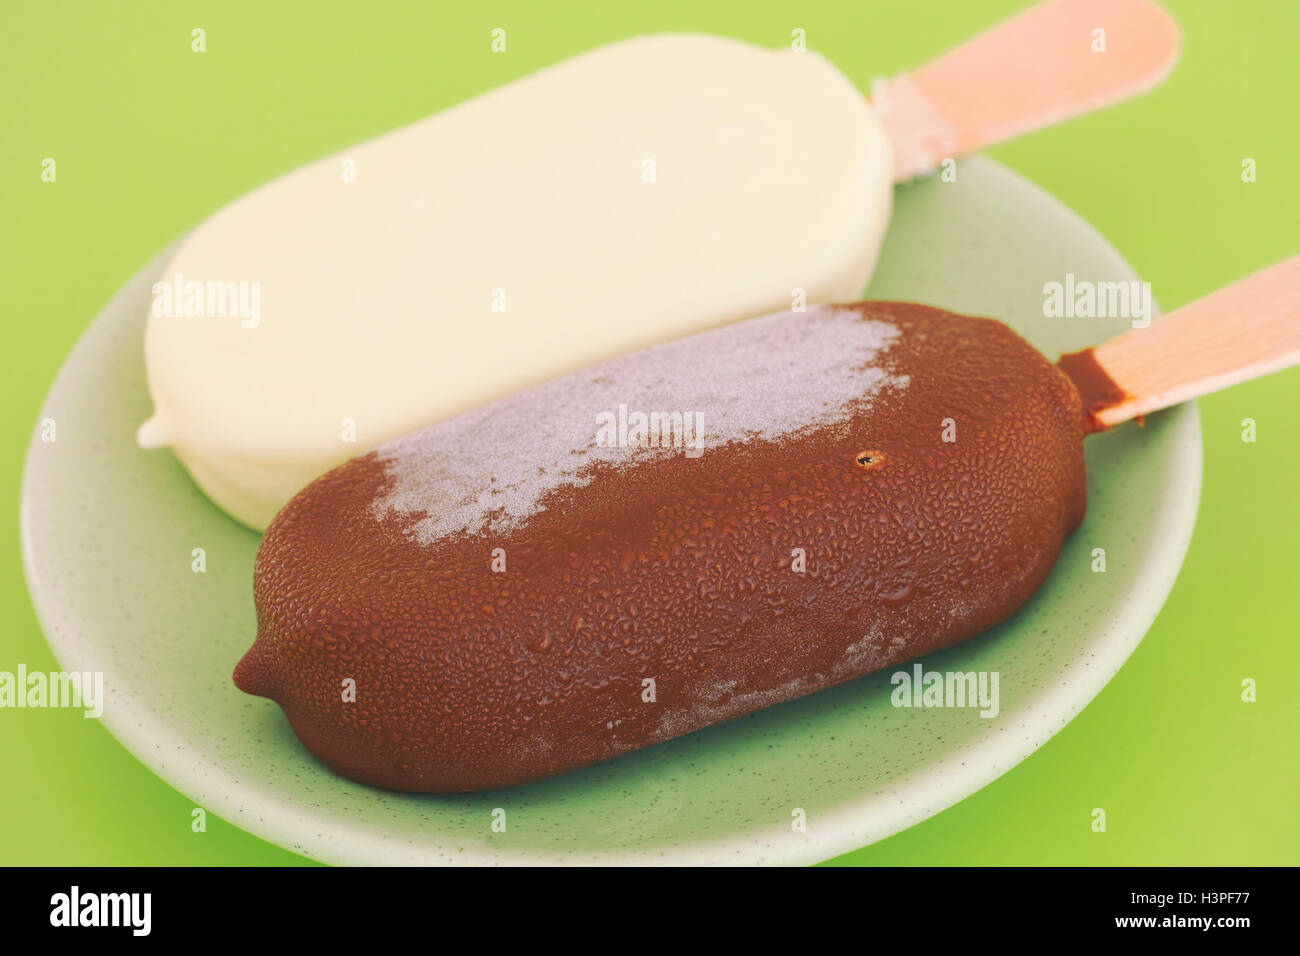 Two chocolate ice cream popsicles. Brown and white chocolate. Stock Photo